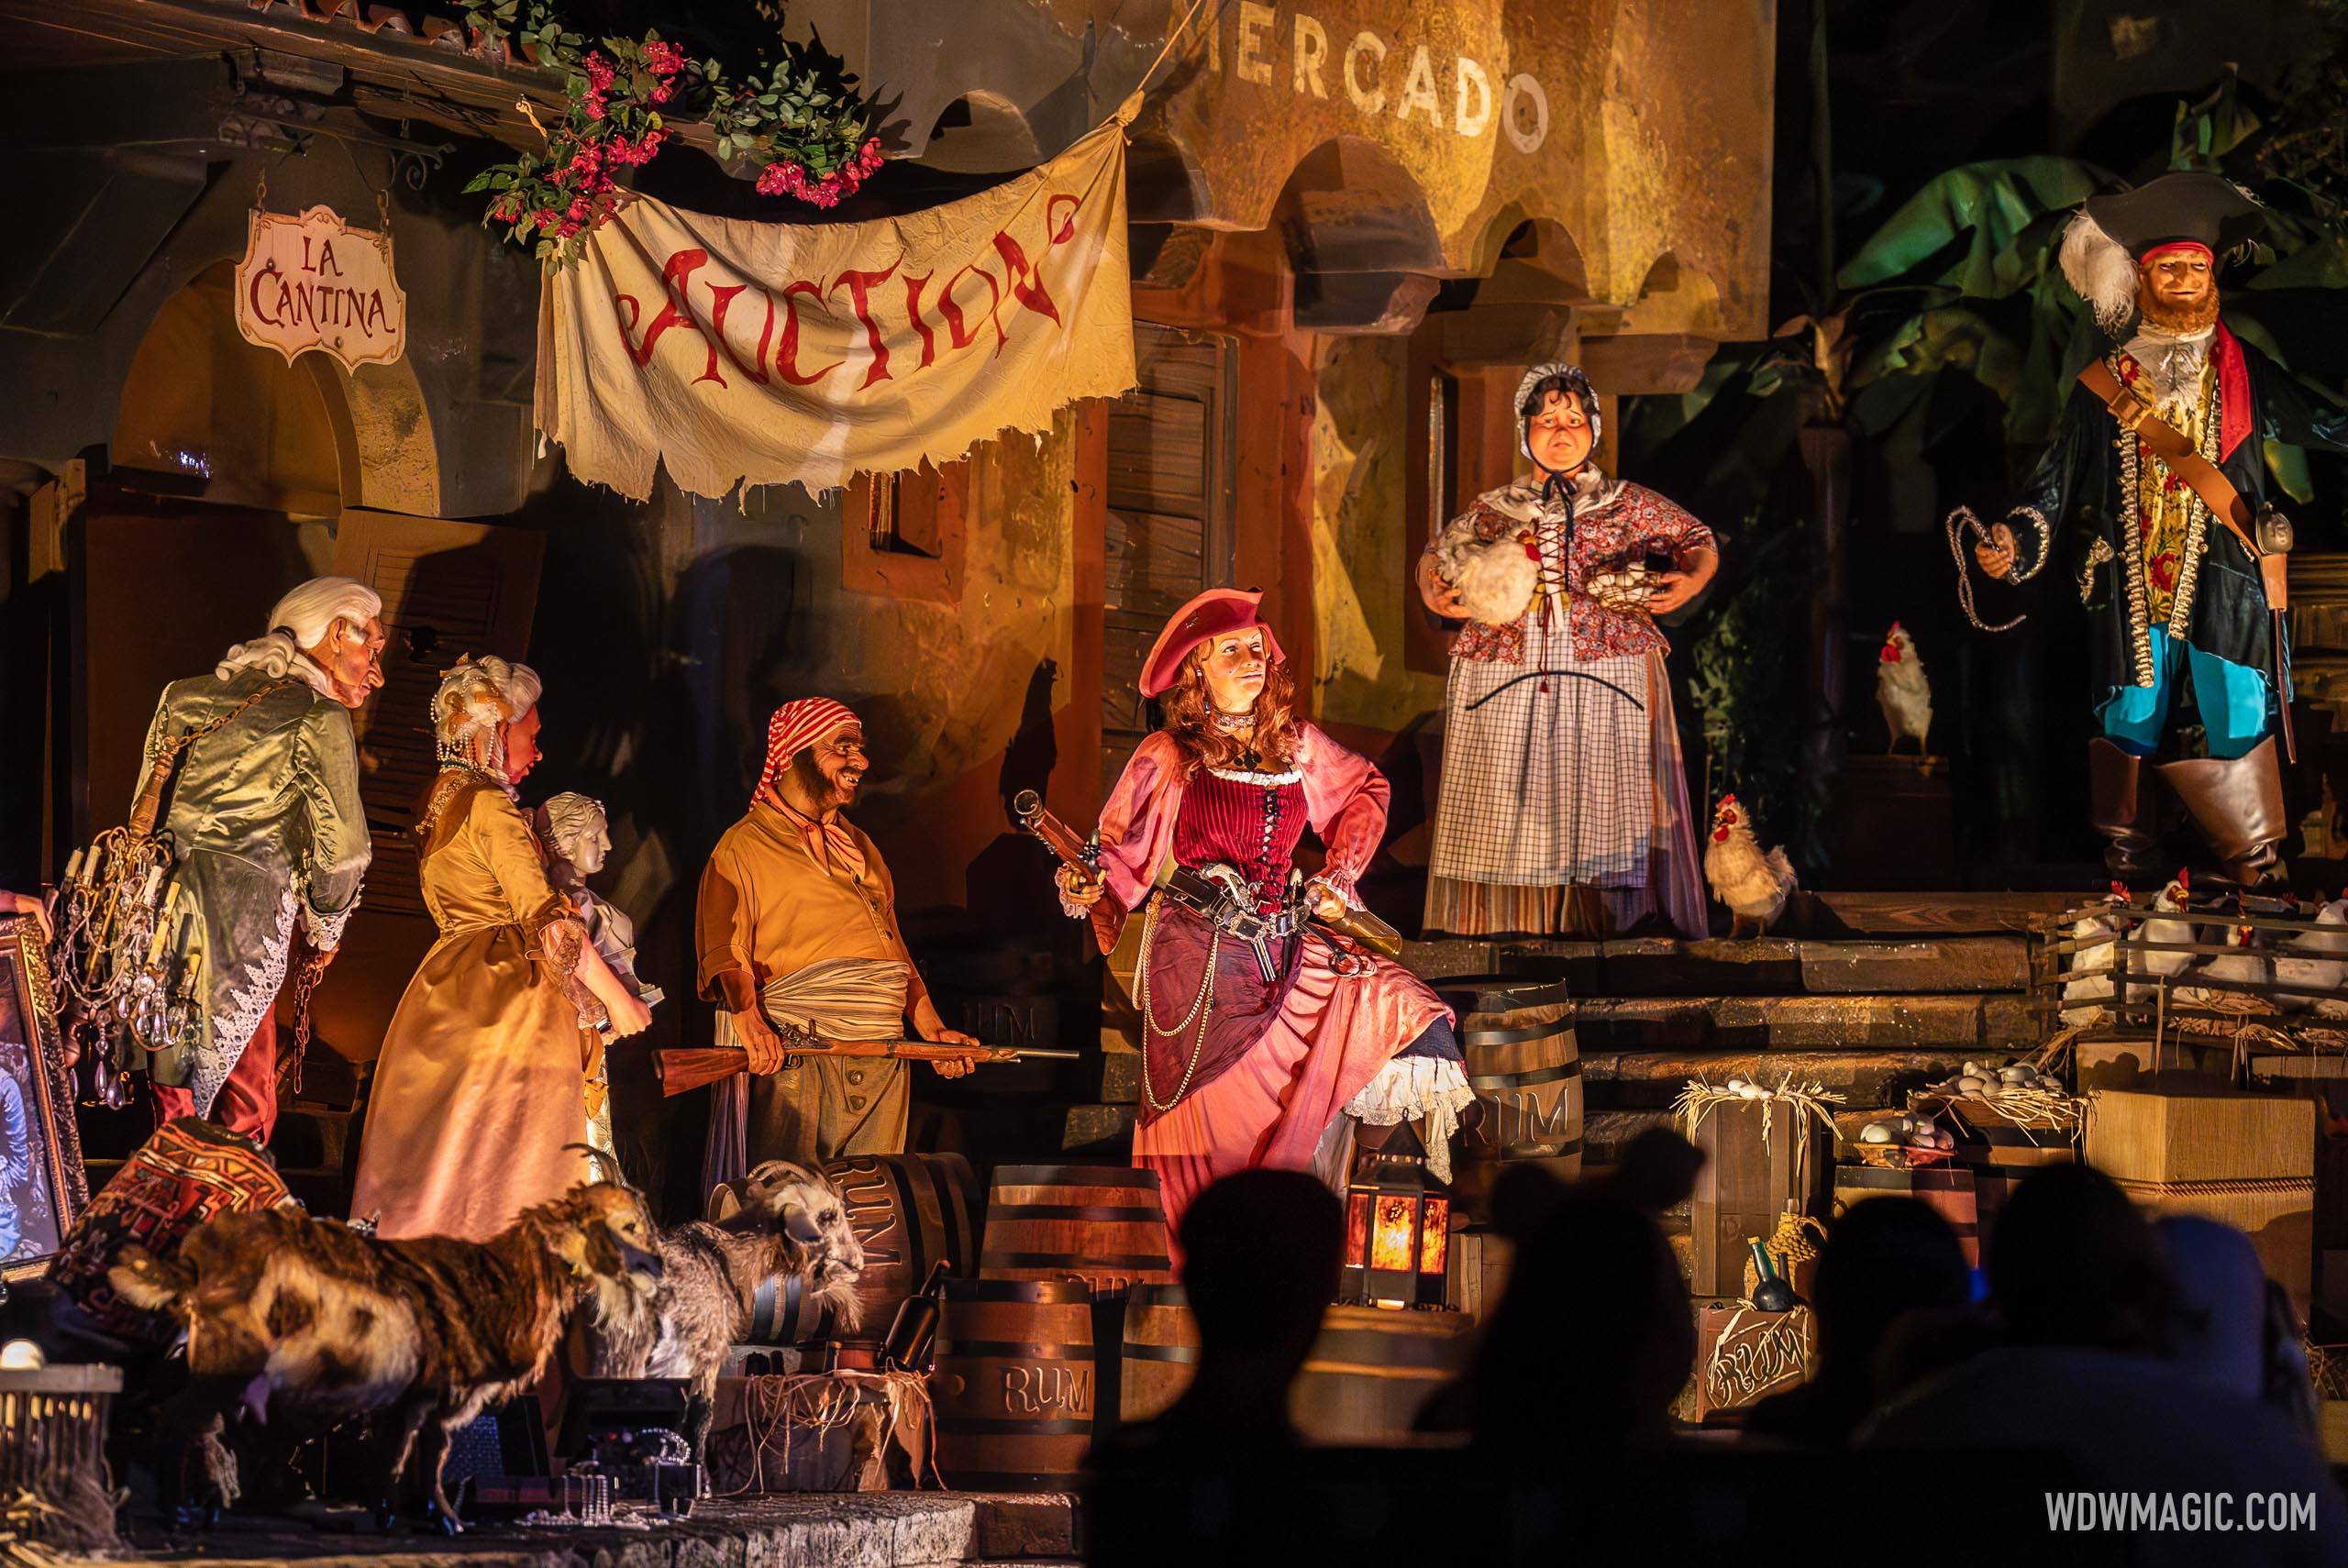 New Pirates of the Caribbean entertainment